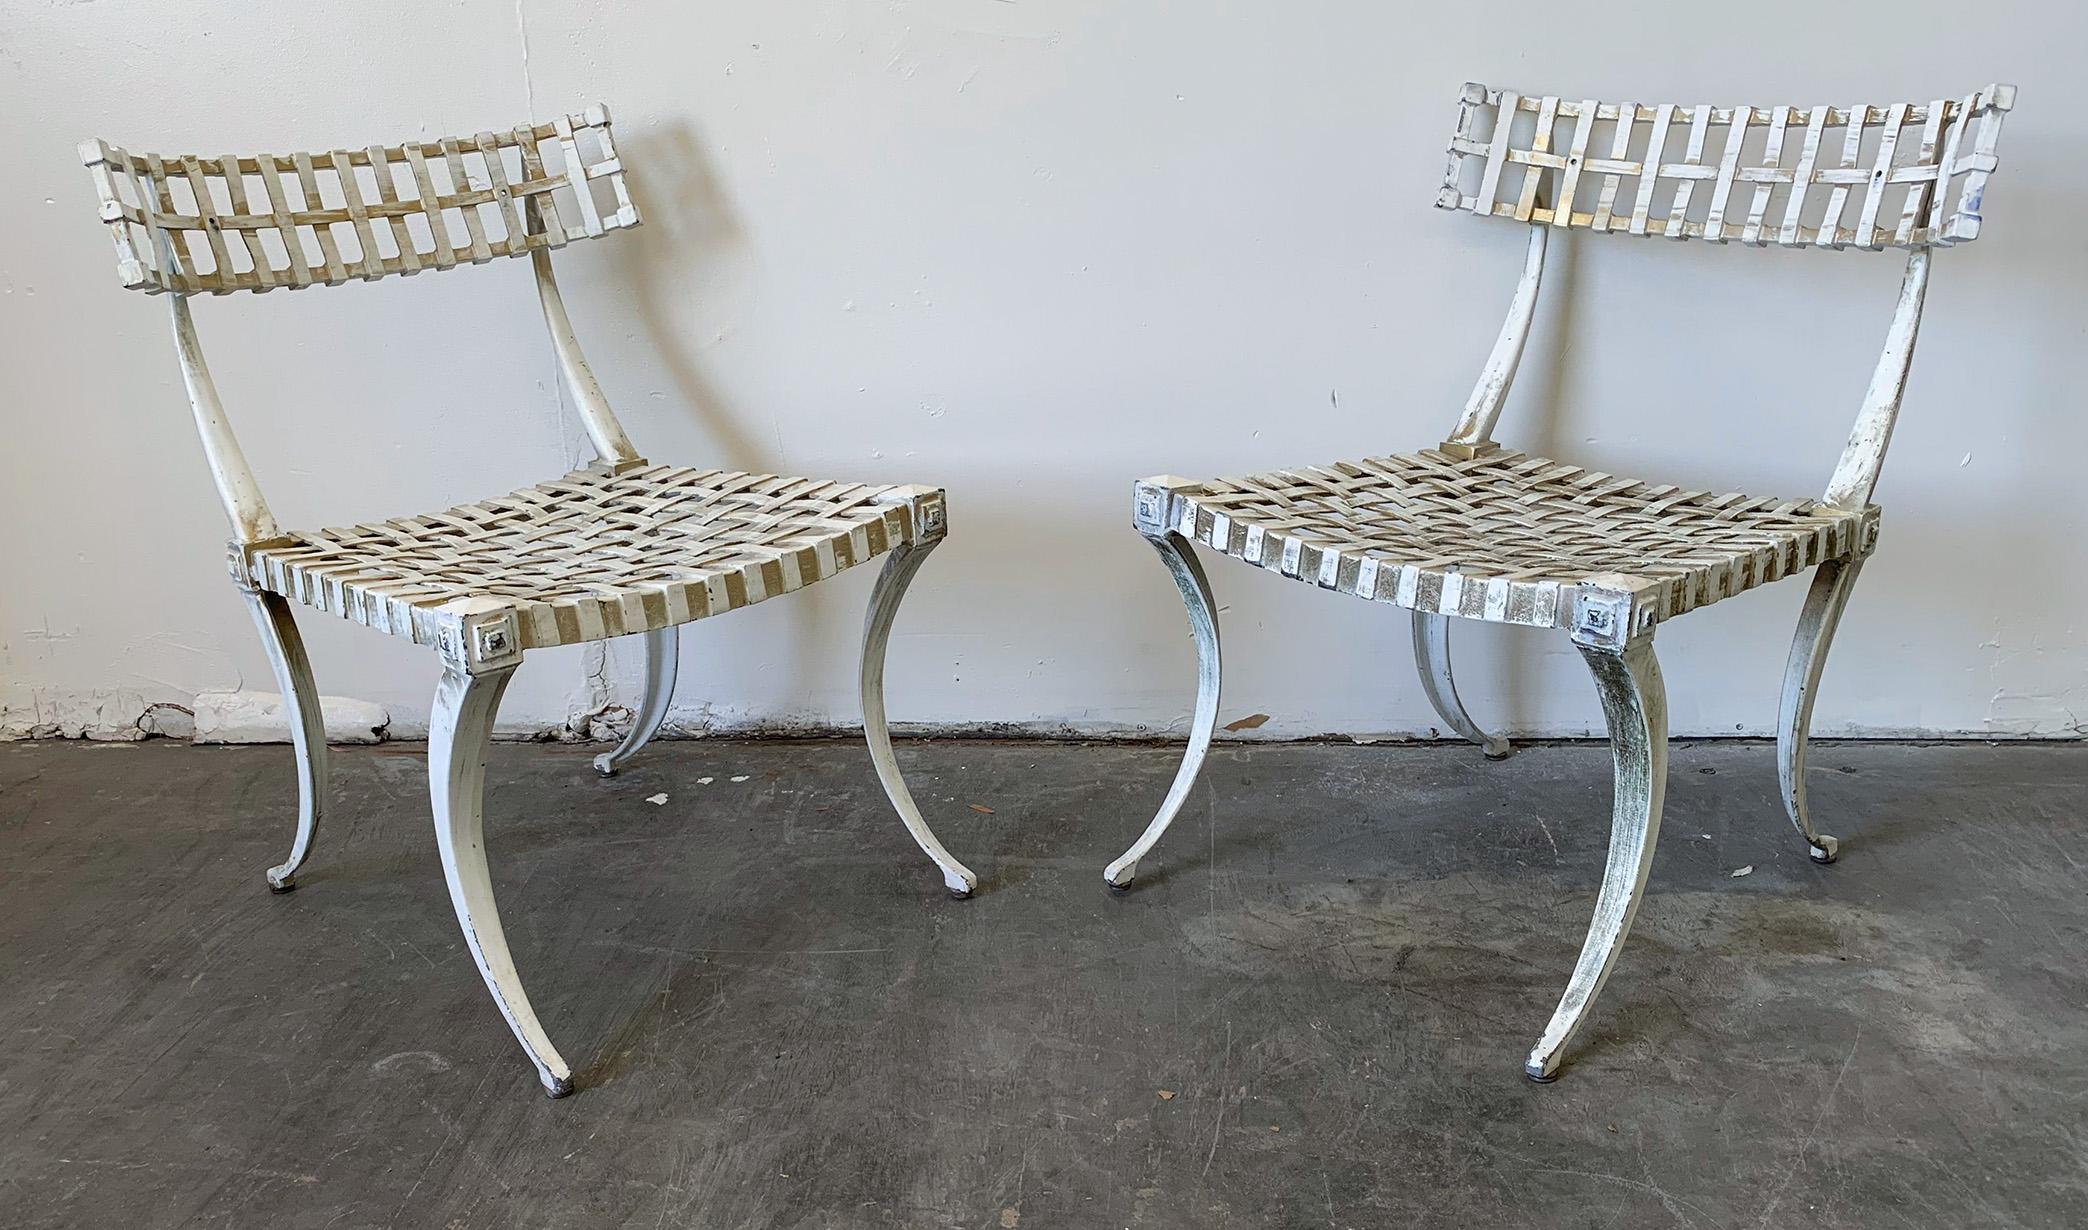 Priced for the pair-- 

Available right now we have this stunning pair of Klismos chairs by Thinline, a prominent furniture manufacturer of outdoor furniture throughout the 20th century. This Klismos design has been used by a couple designers in the